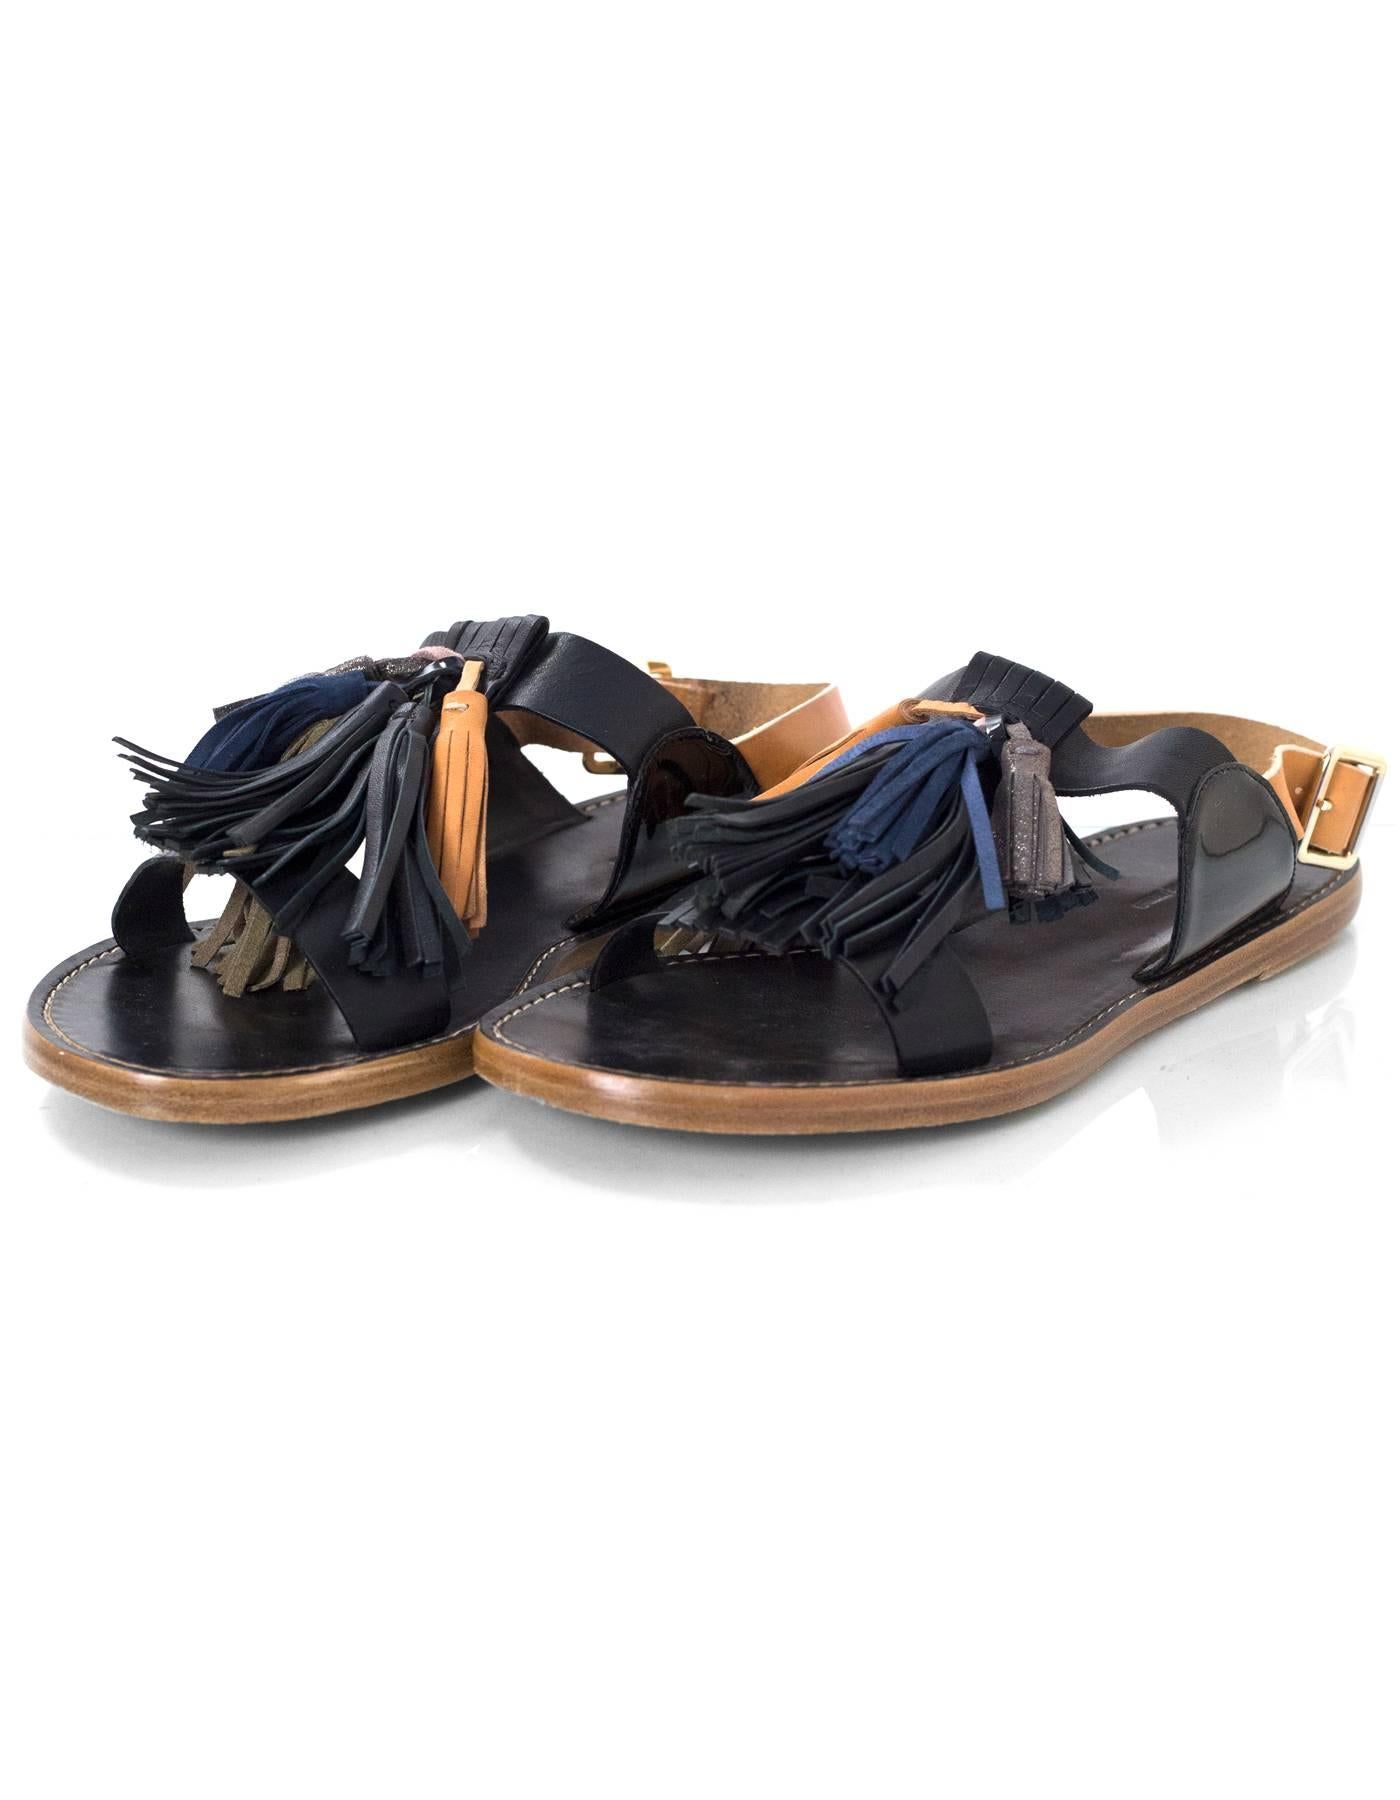 Etoile Isabel Marant Black & Multi Color Pompons Tassel Sandals Sz 41

Made In: Italy
Color: Black, multi
Materials: Leather
Closure/Opening: Buckle closure at heel
Sole Stamp: Isabel Marant Etoile Made in Italy 41
Retail Price: $905+ tax
Overall